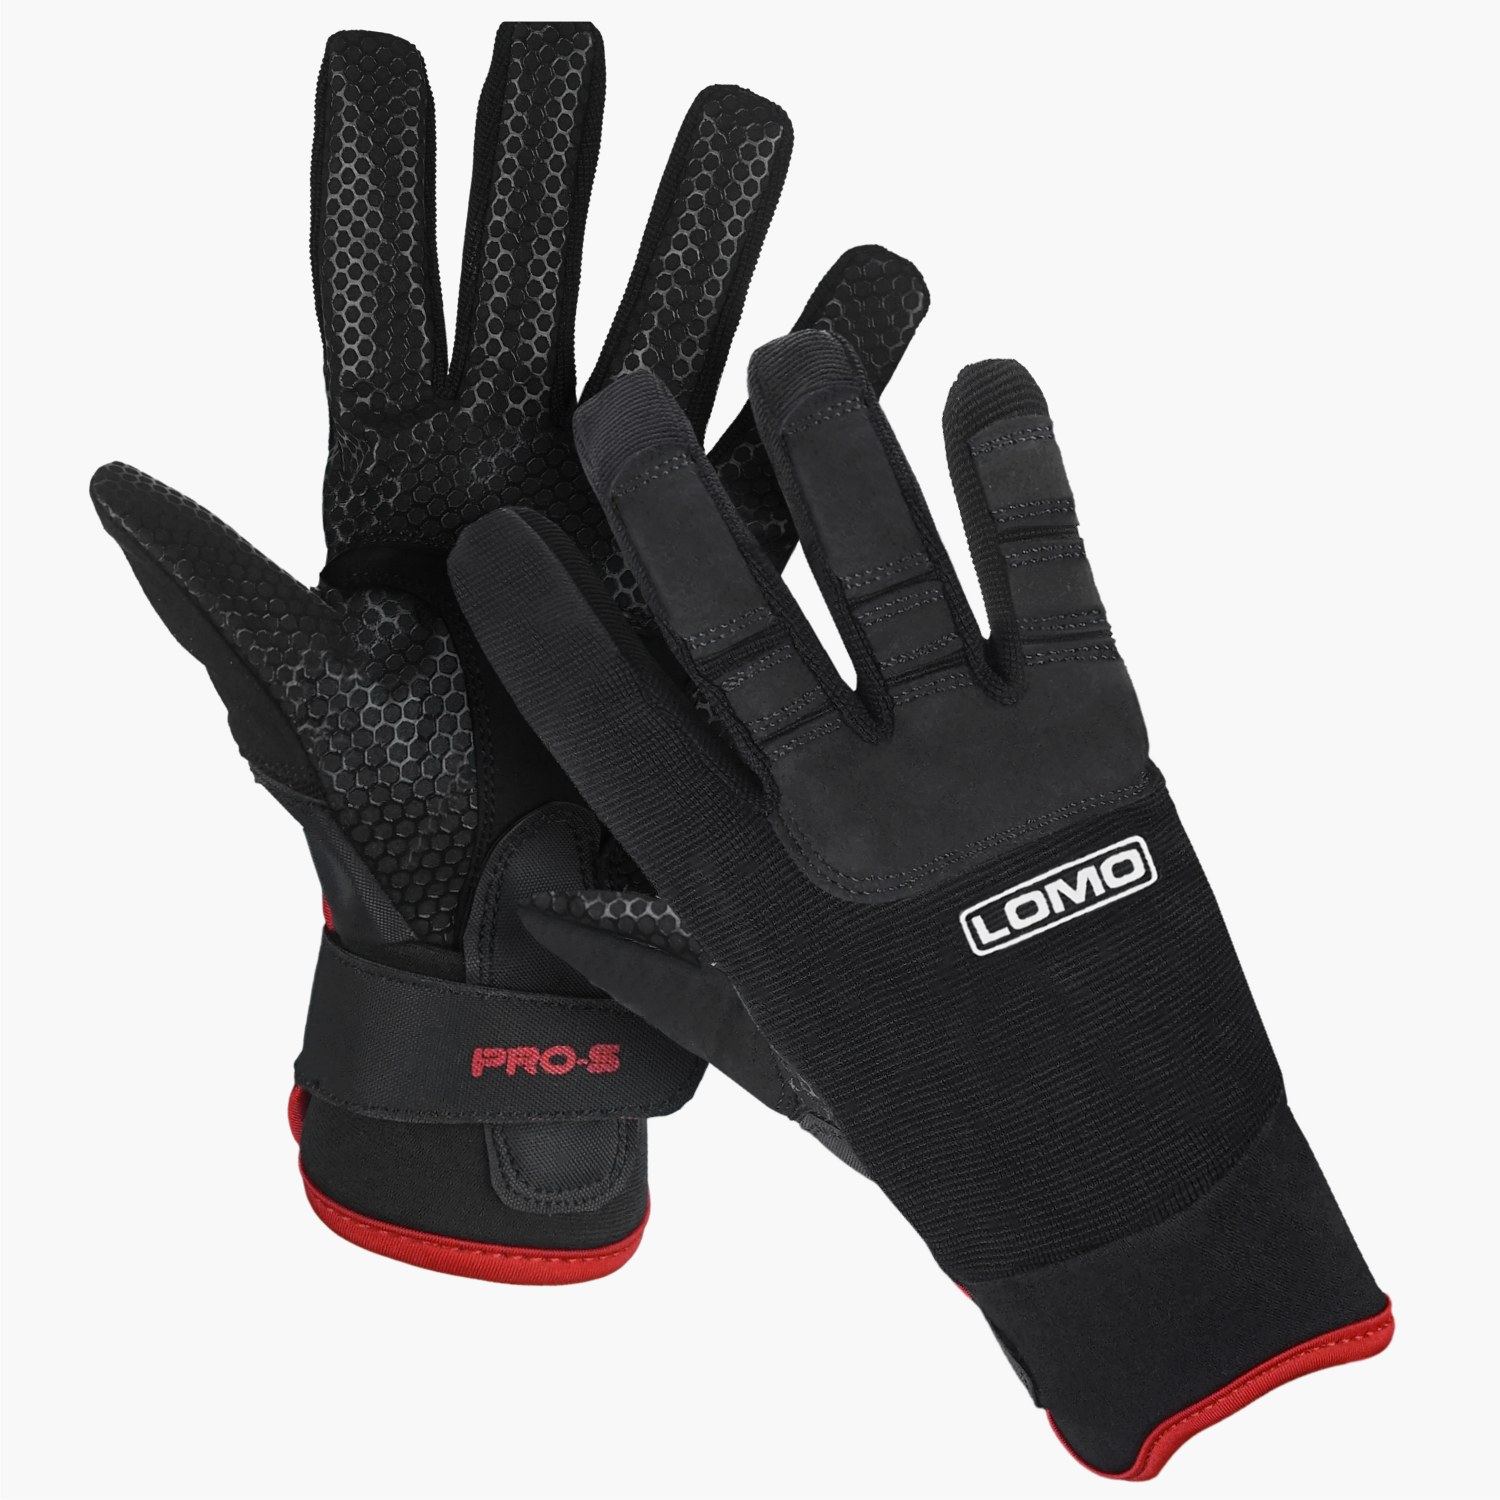 Sailing Pro-S Gloves - Long Finger  Lomo Watersport UK. Wetsuits, Dry Bags  & Outdoor Gear.